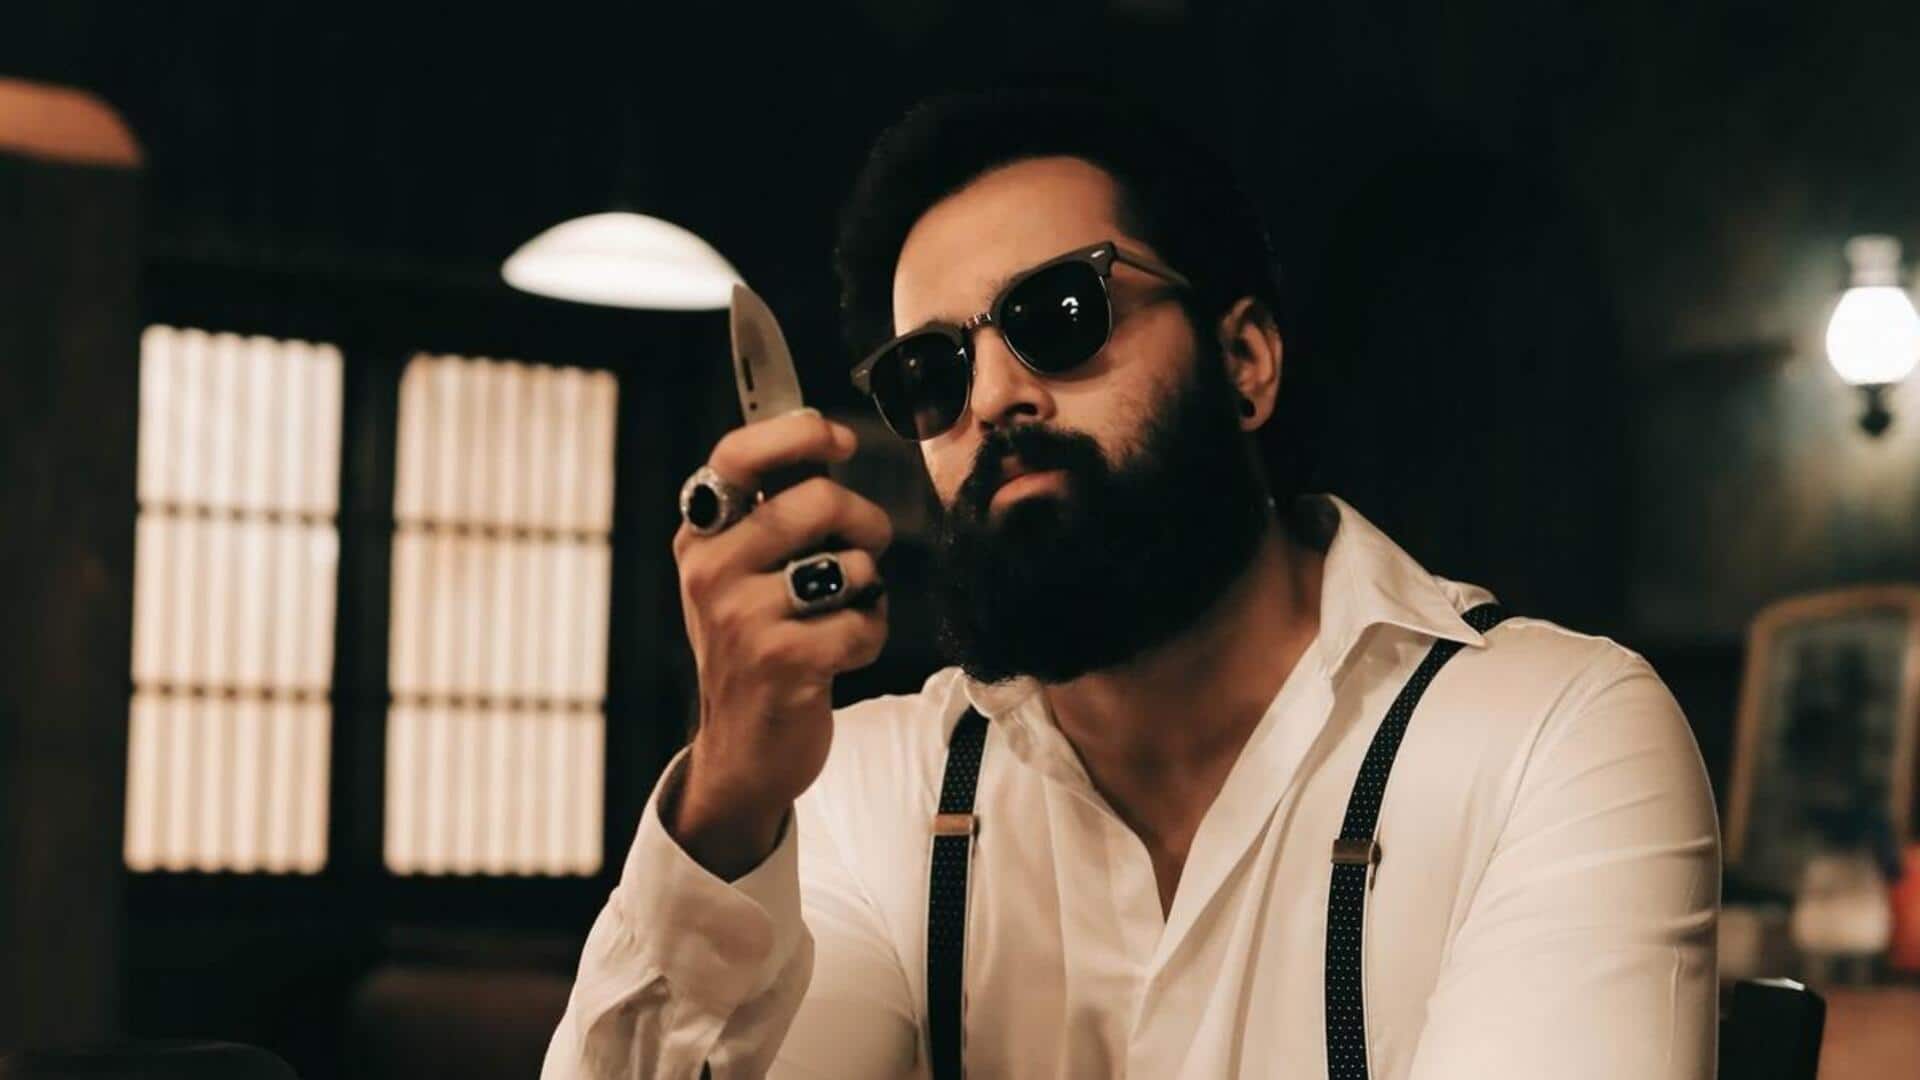 'Marco' motion poster: Unni Mukundan teases action-drama in 'Mikhael' spin-off